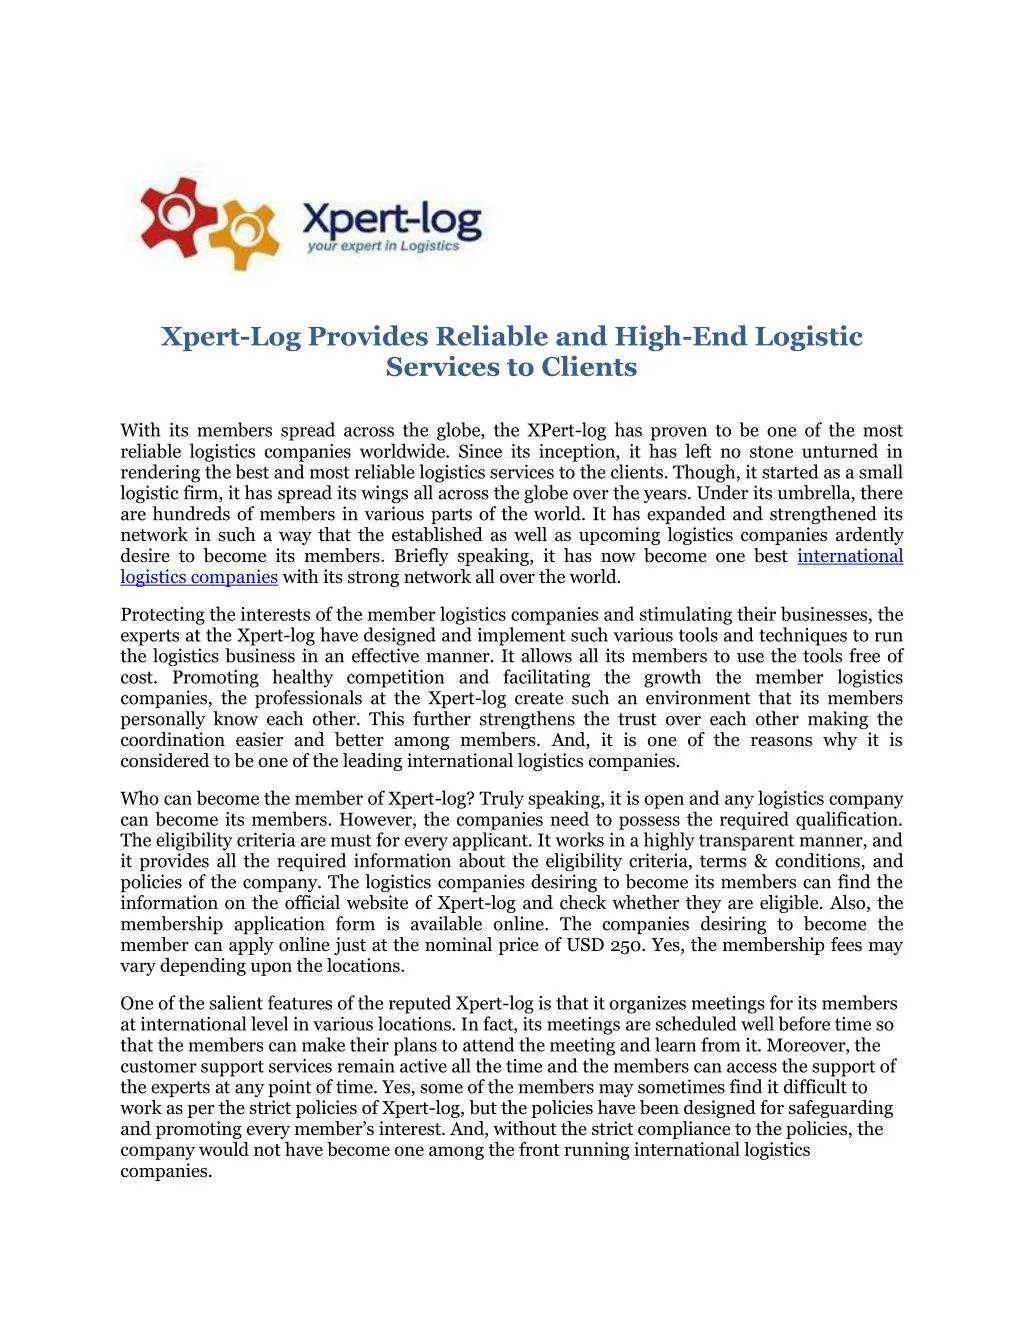 xpert log provides reliable and high end logistic